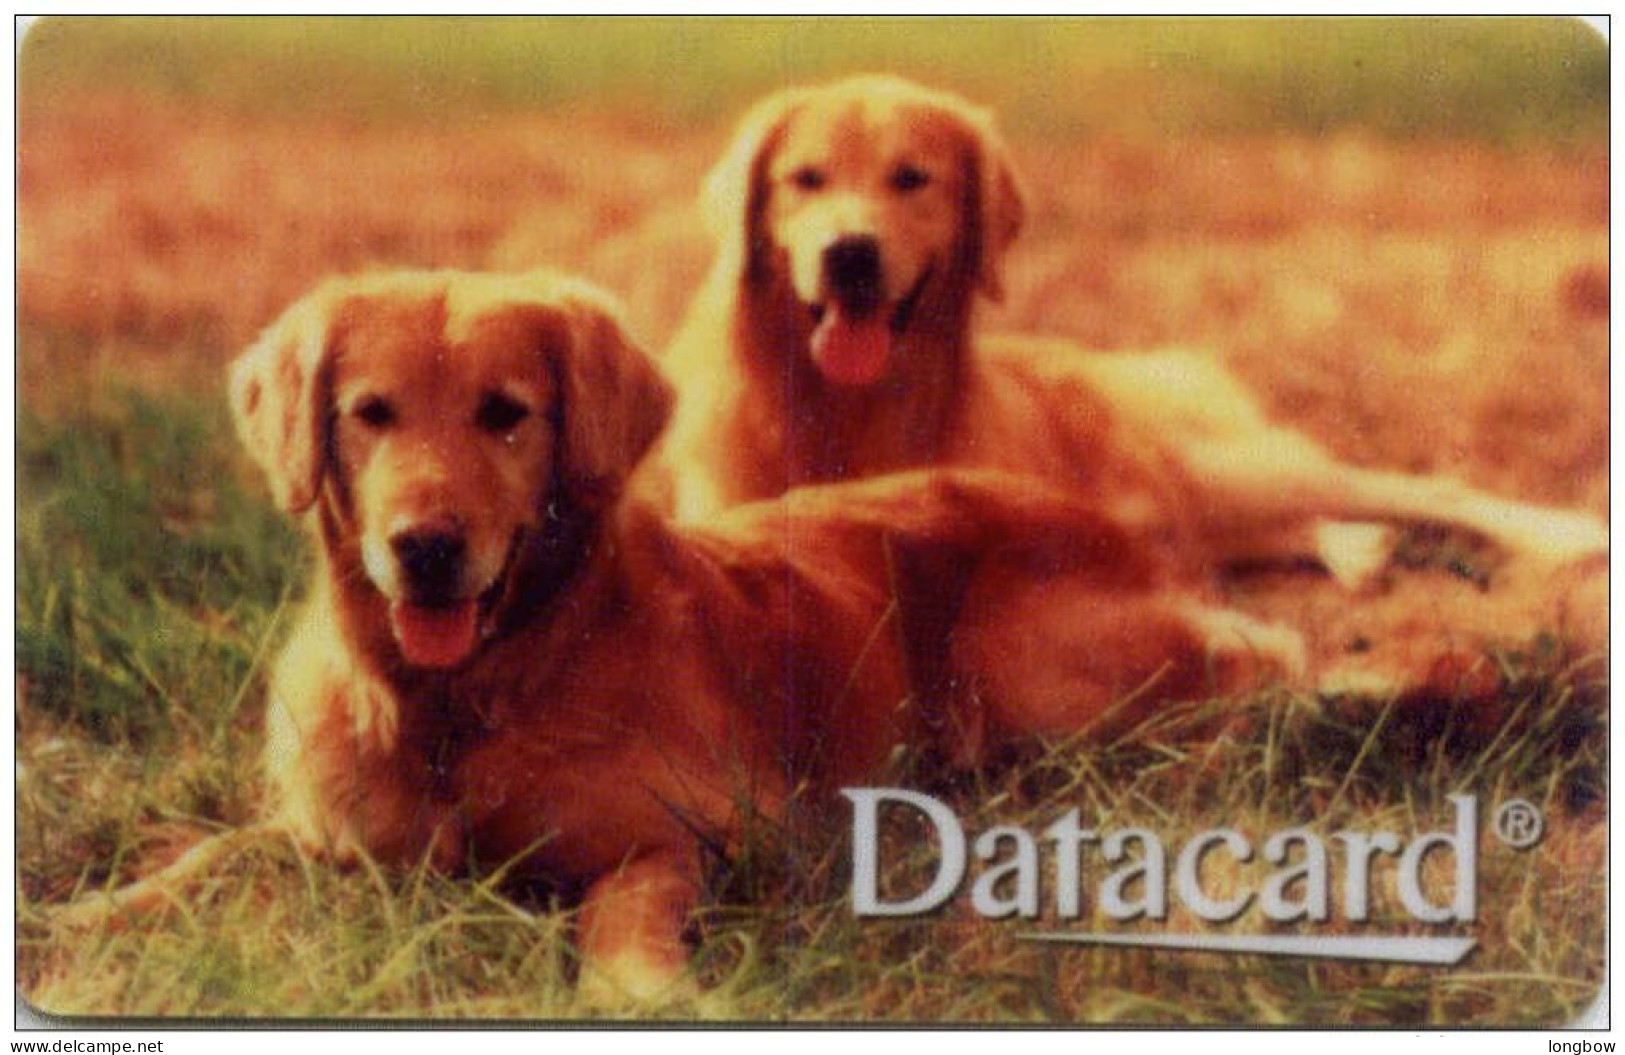 DATACARD Magnetic-DOGS - Unclassified